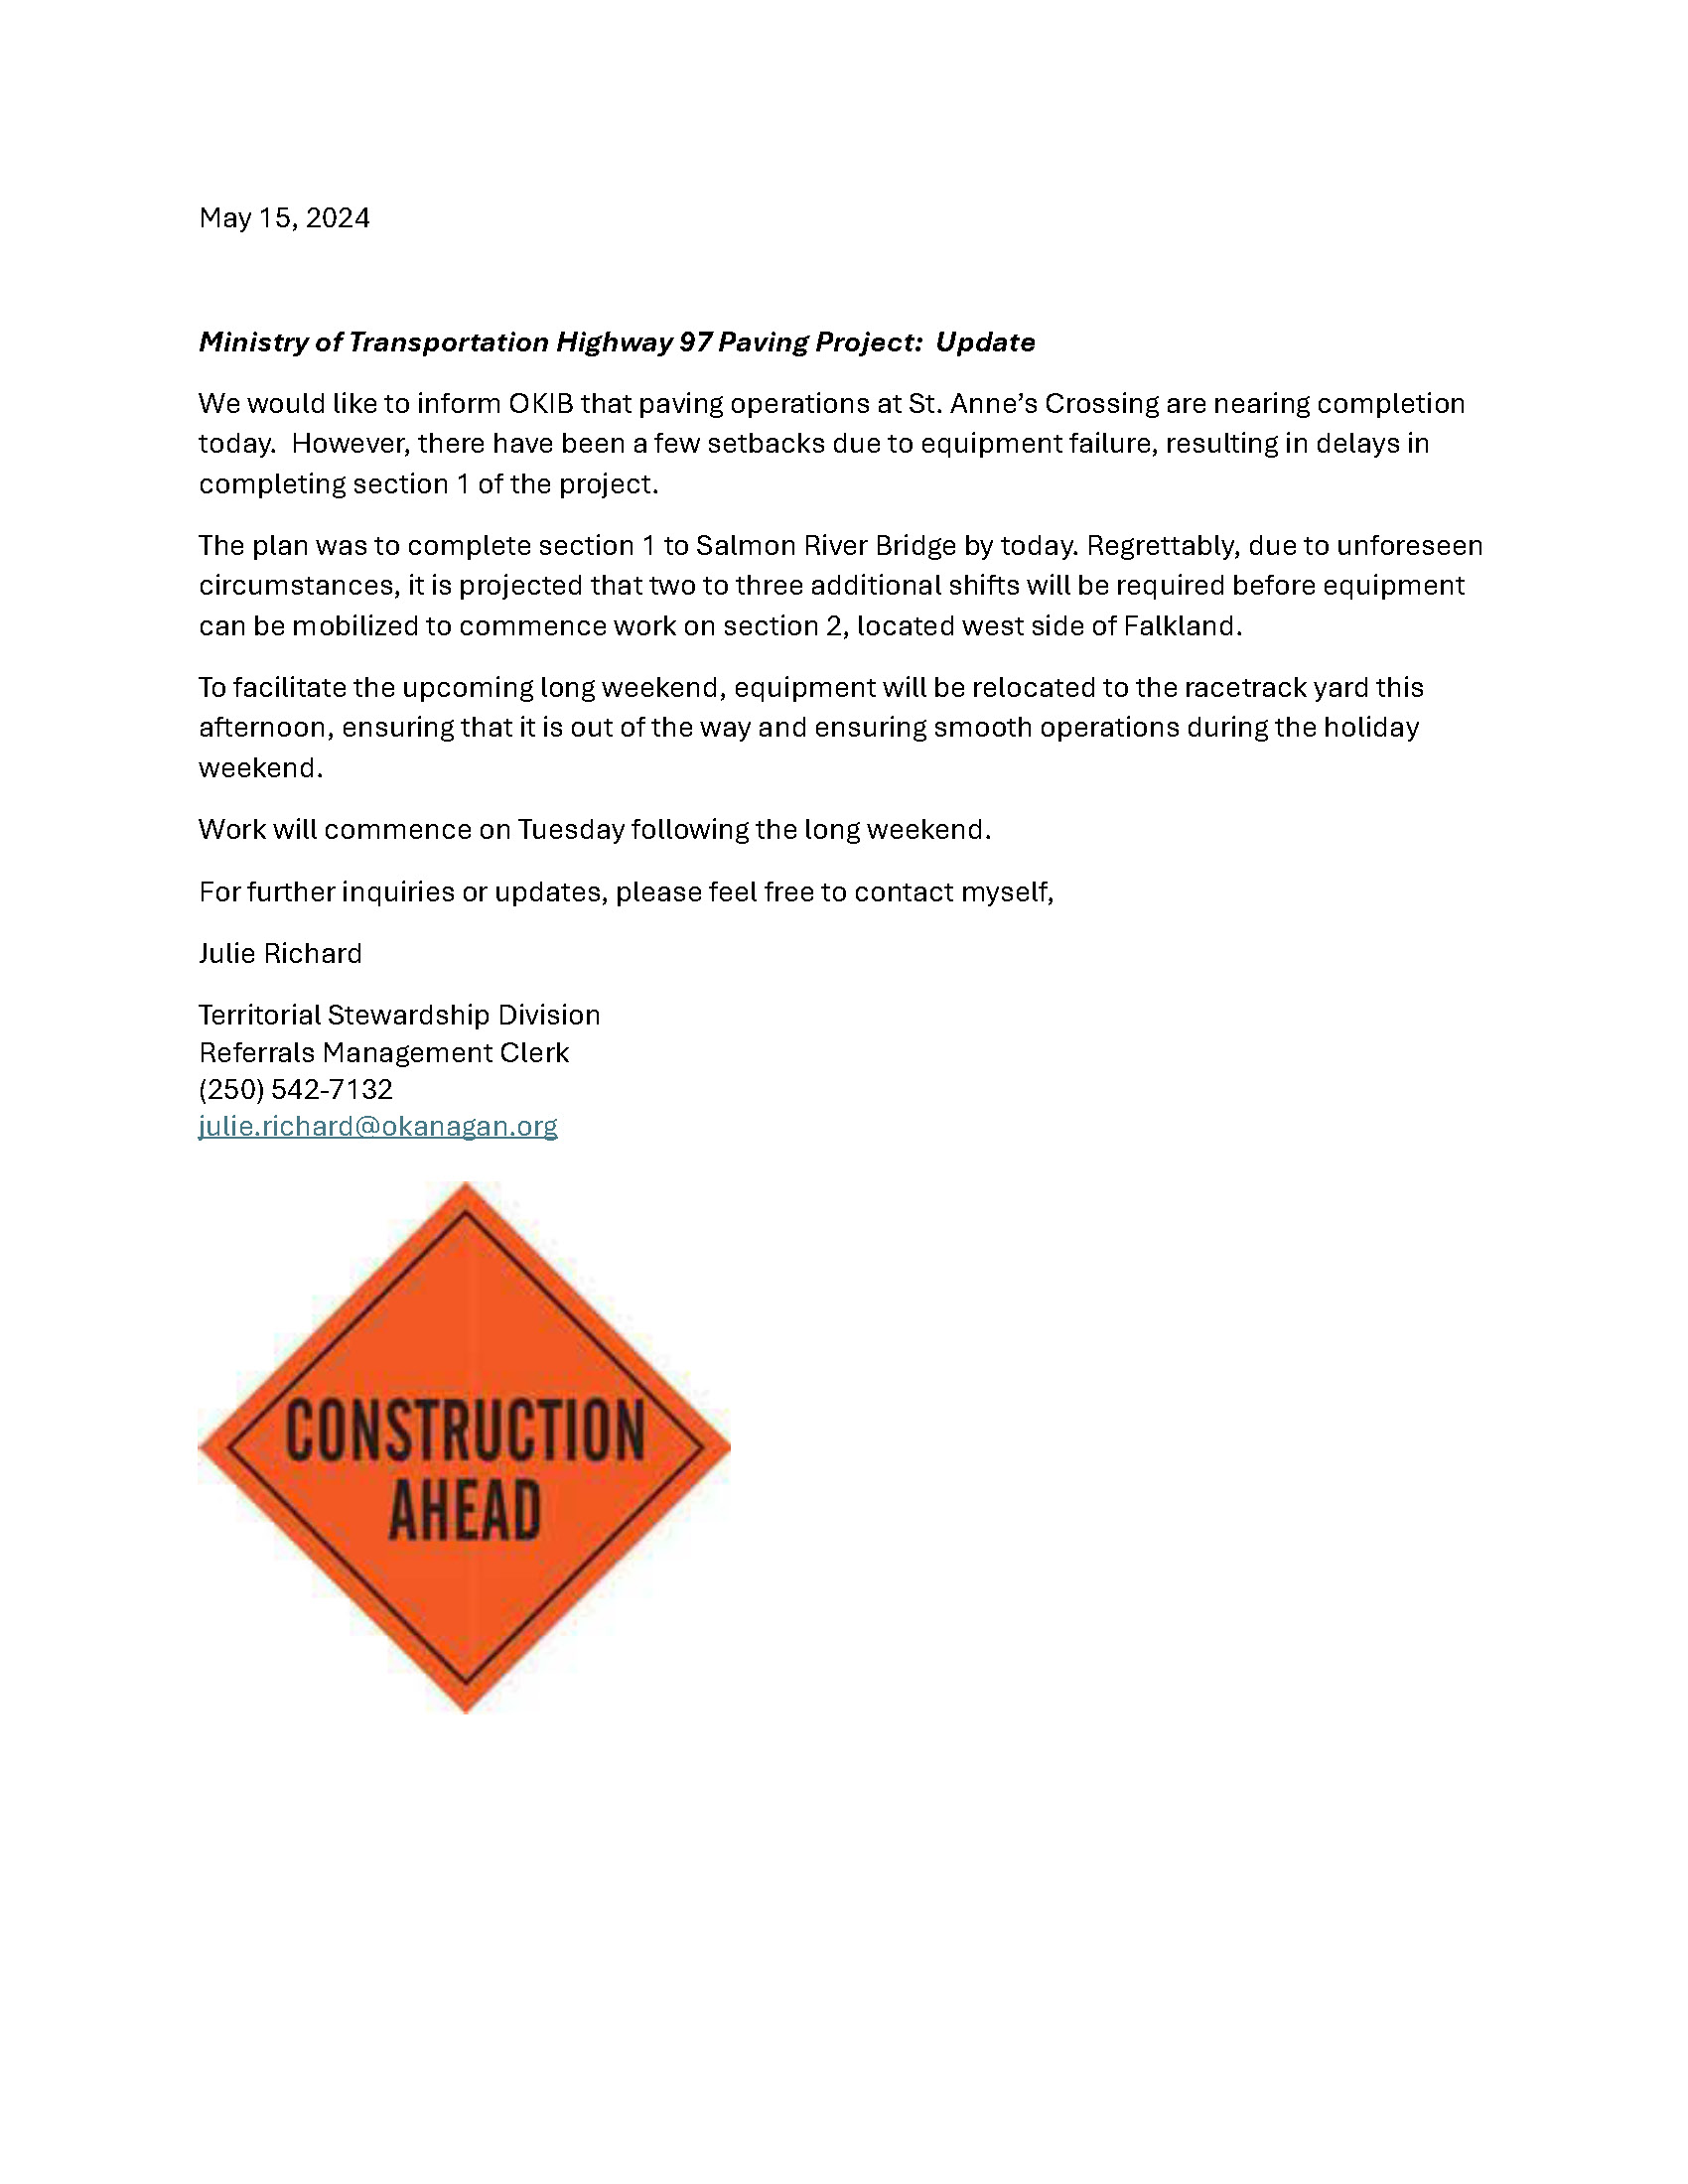 Ministry of Transportation Highway 97 Paving Project: Update